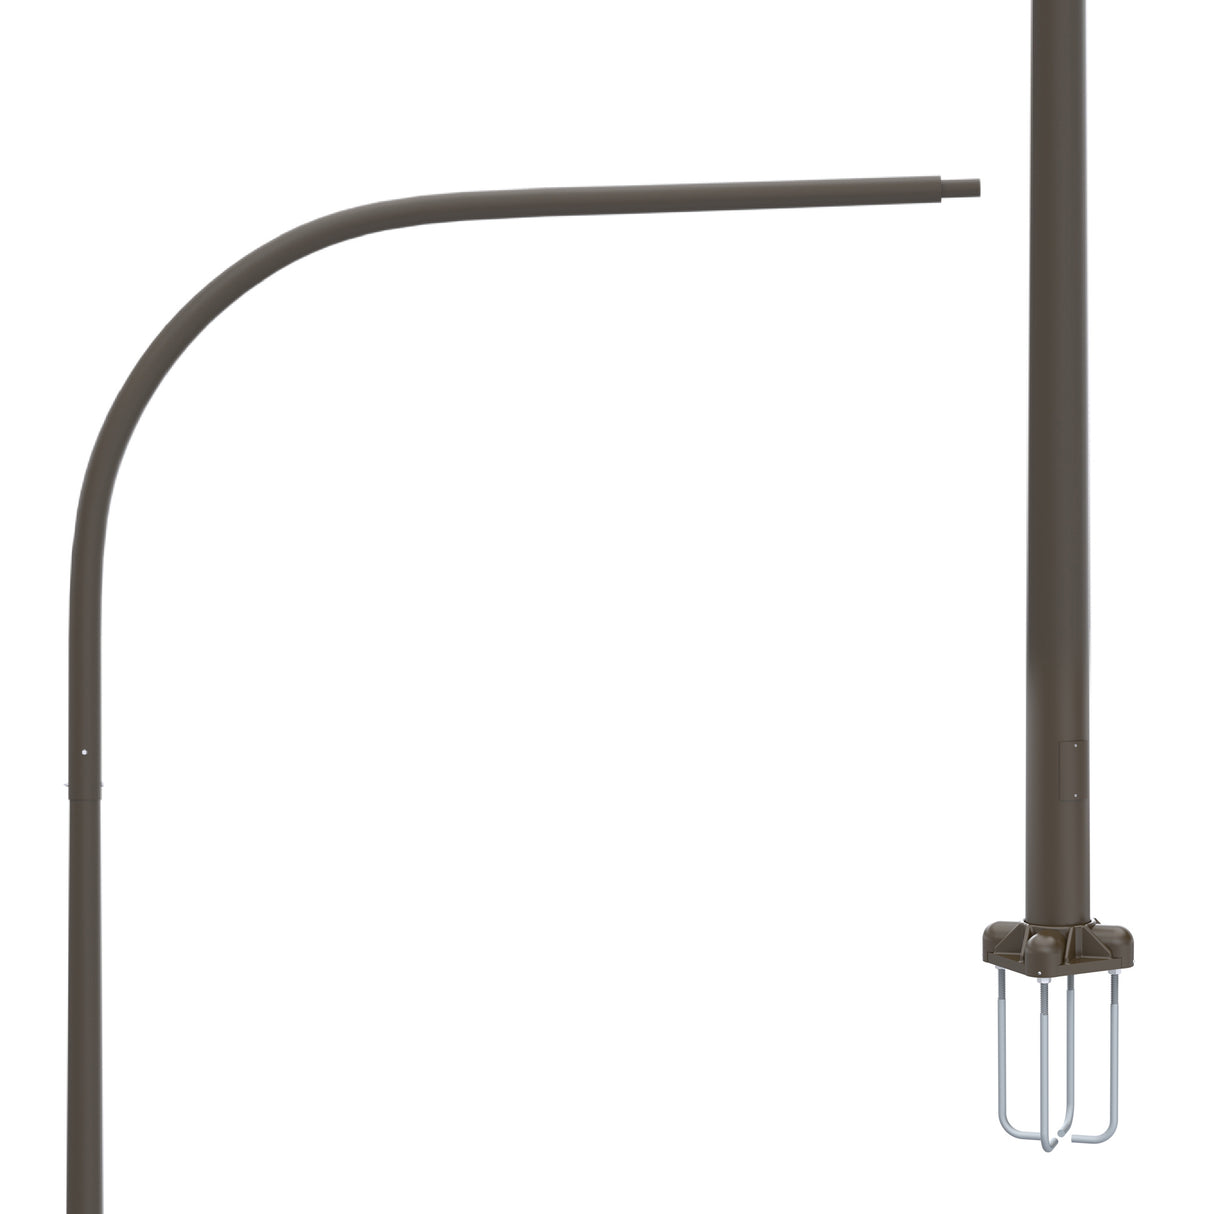 40' Tall x 10.0" Base OD x 6.0" Top OD x 0.188" Thick, Round Tapered Aluminum, Anchor Base Light Pole with 10' Davit Arm